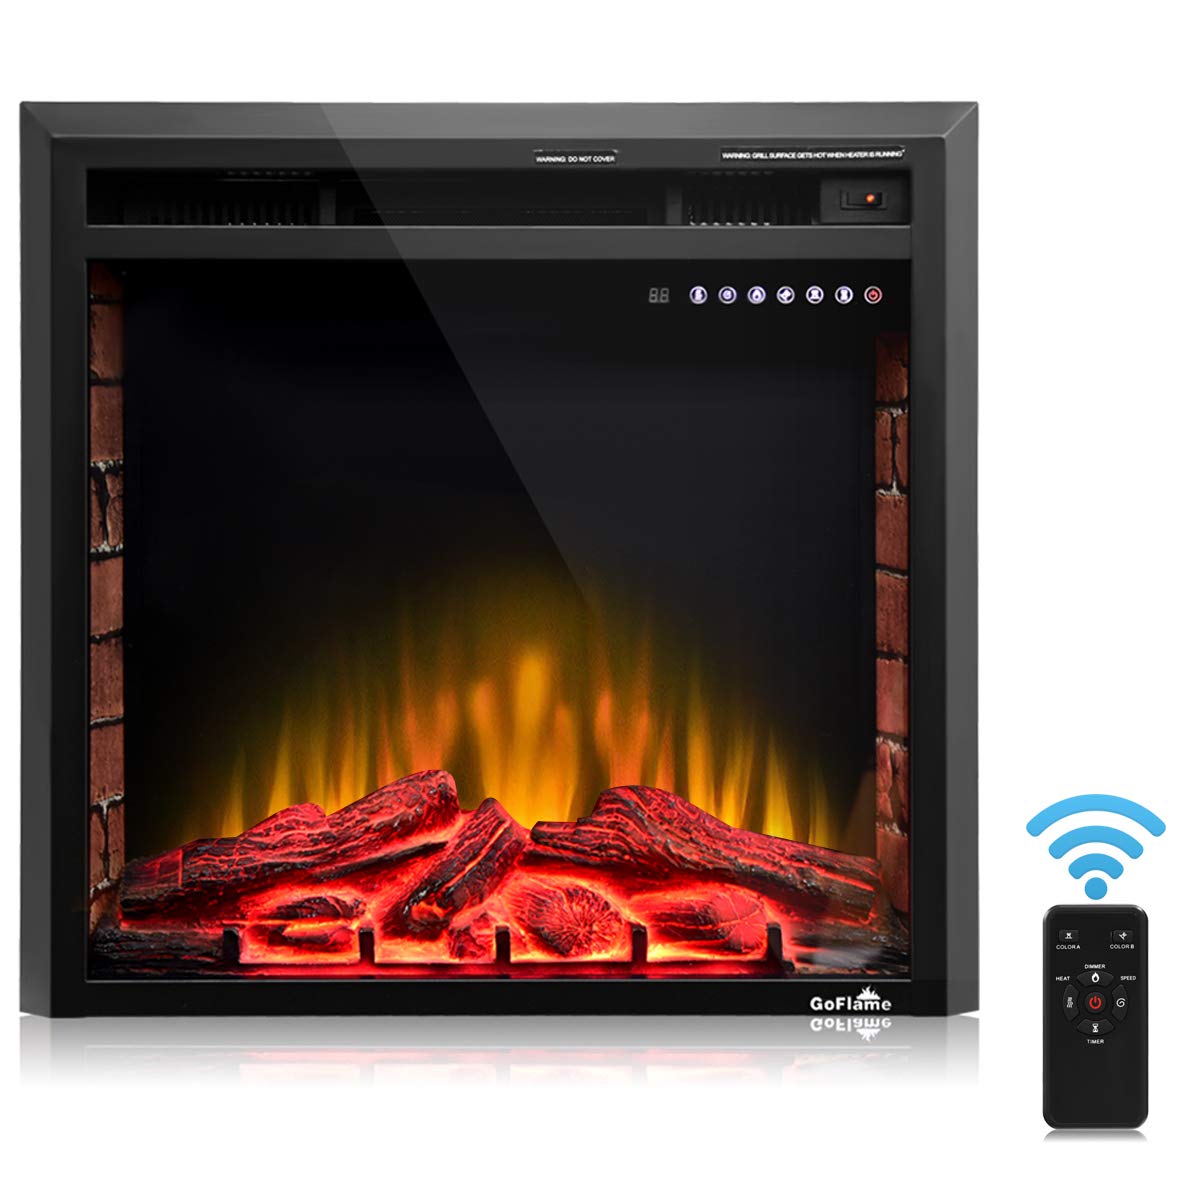 Outdoor Electric Fireplace Heater Elegant Best fort Recessed 36" Electric Fireplace Multi Operating Electric Fireplace Insert with Remote 750w 1500w Built In Electric Fireplace